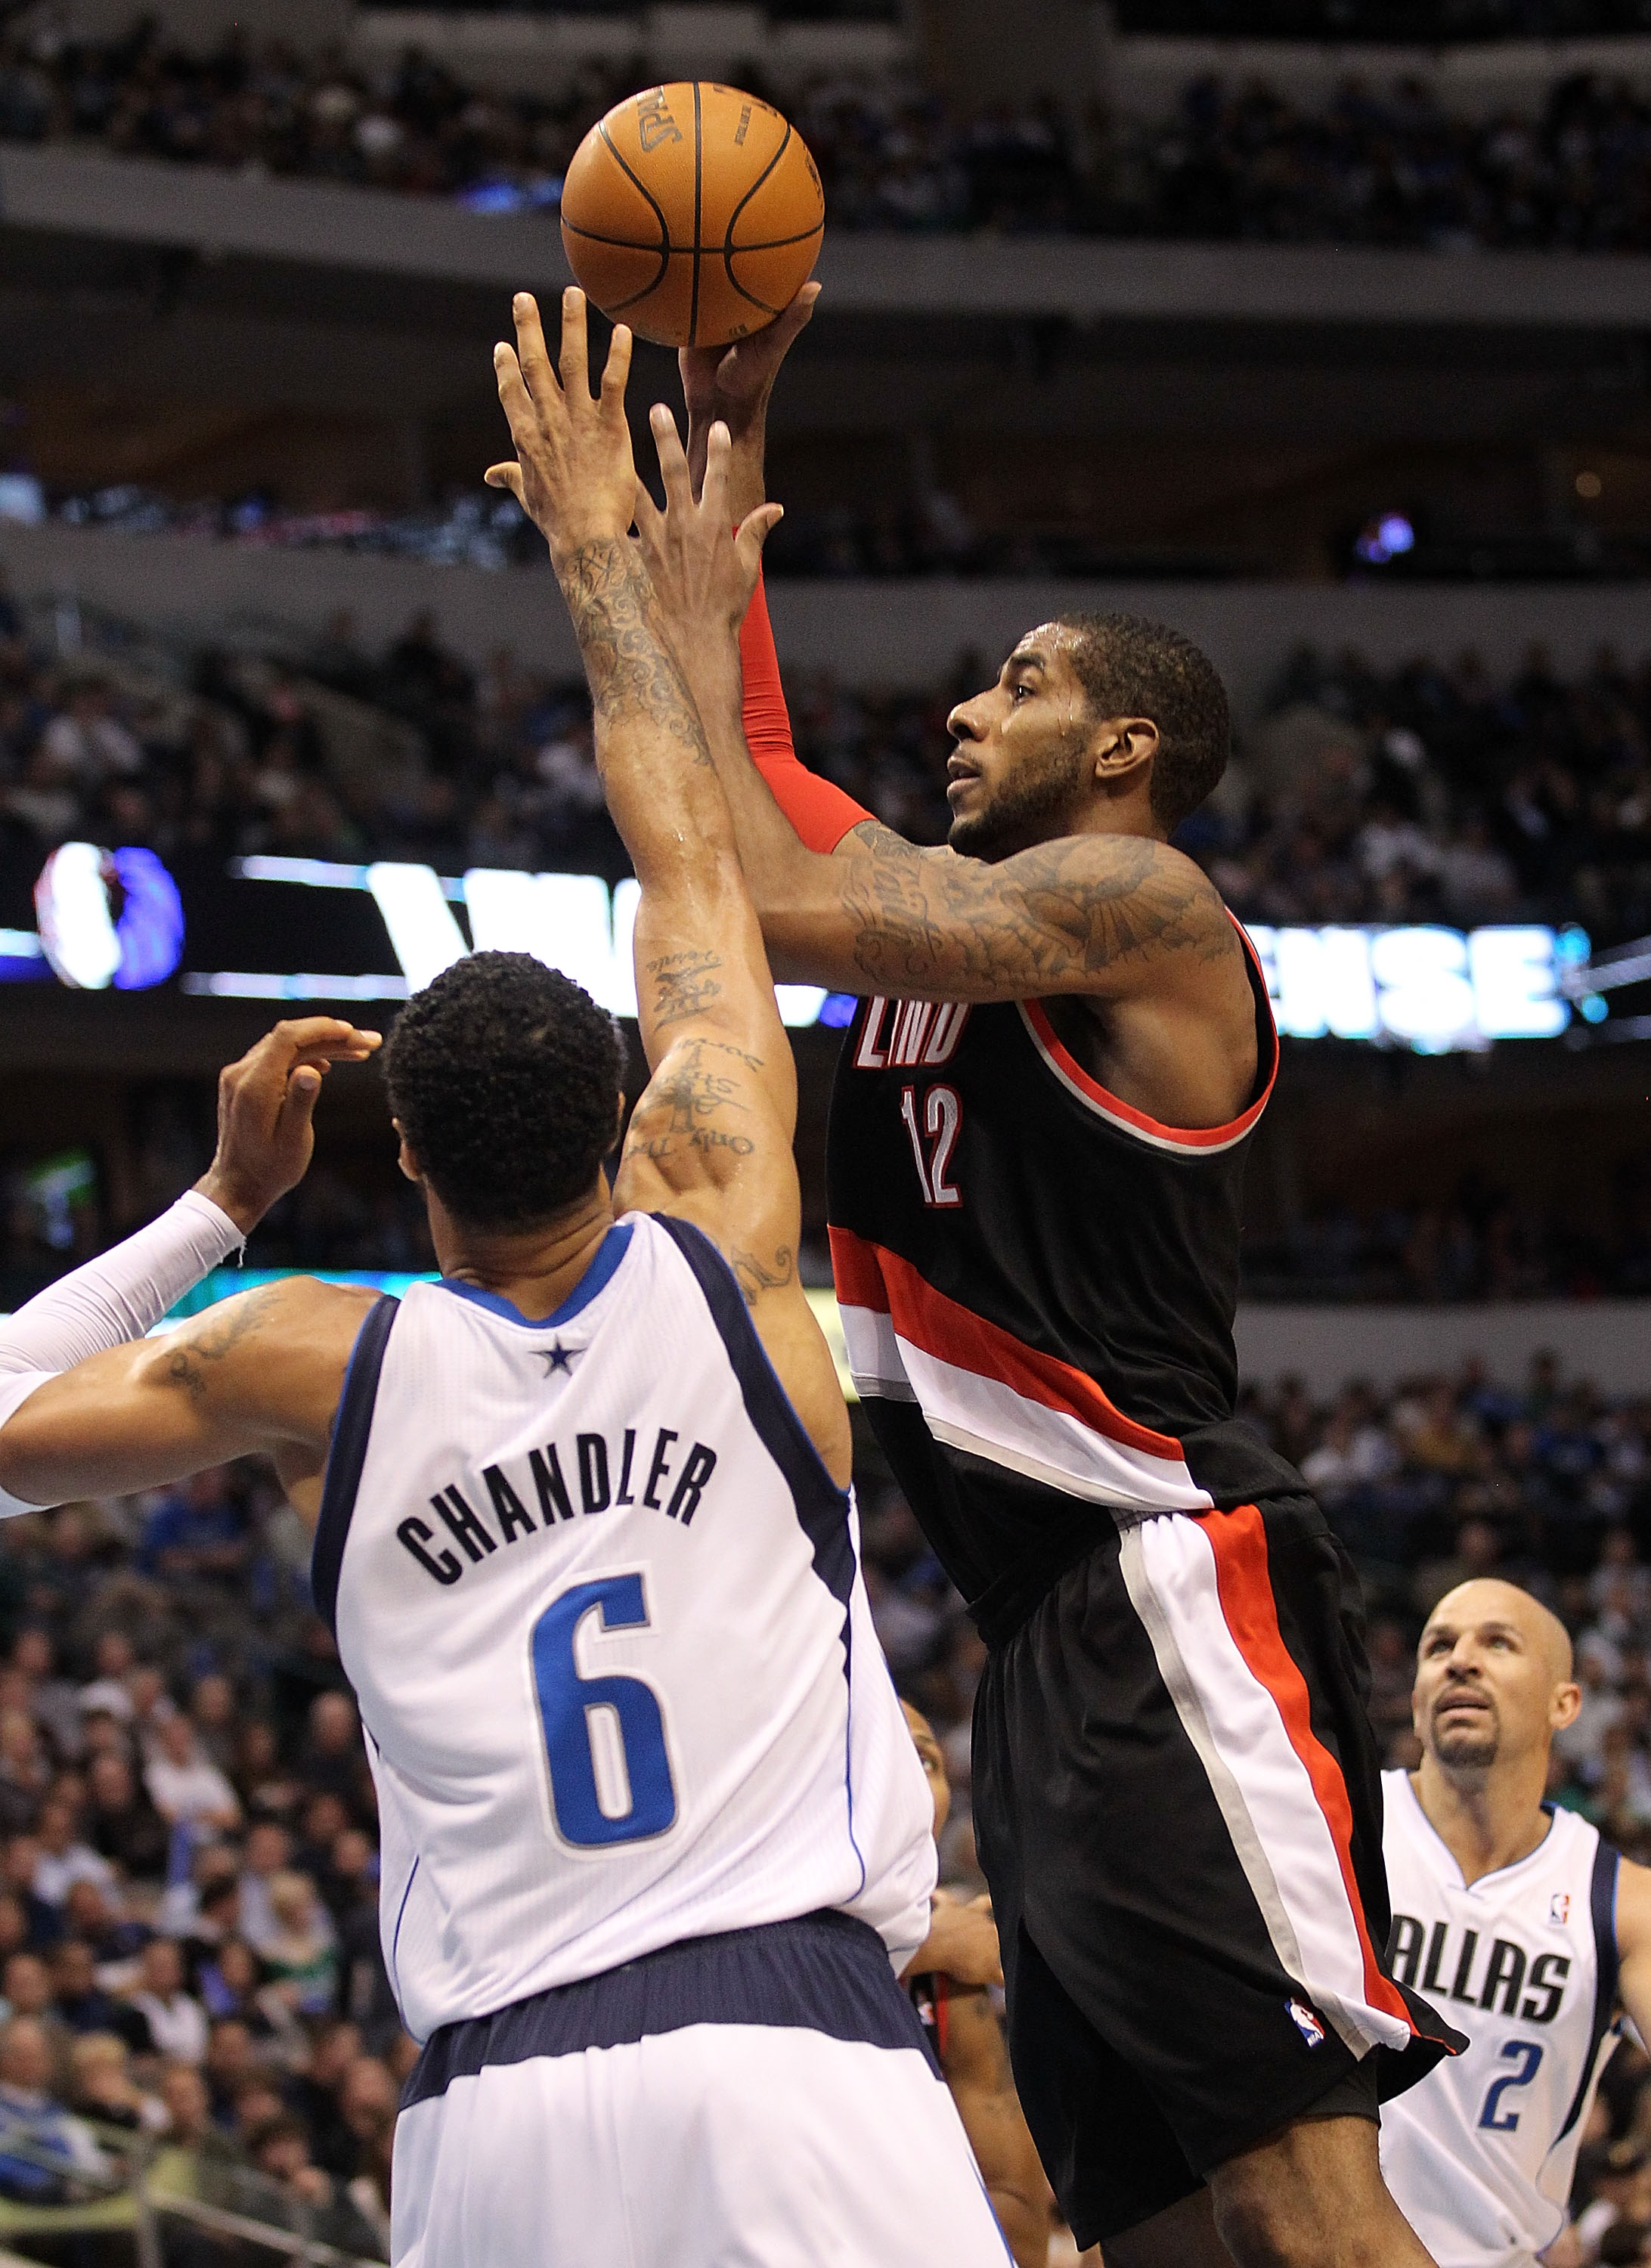 DALLAS, TX - JANUARY 04:  Forward LaMarcus Aldridge #12 of the Portland Trail Blazers takes a shot against Tyson Chandler #6 of the Dallas Mavericks at American Airlines Center on January 4, 2011 in Dallas, Texas.  NOTE TO USER: User expressly acknowledge